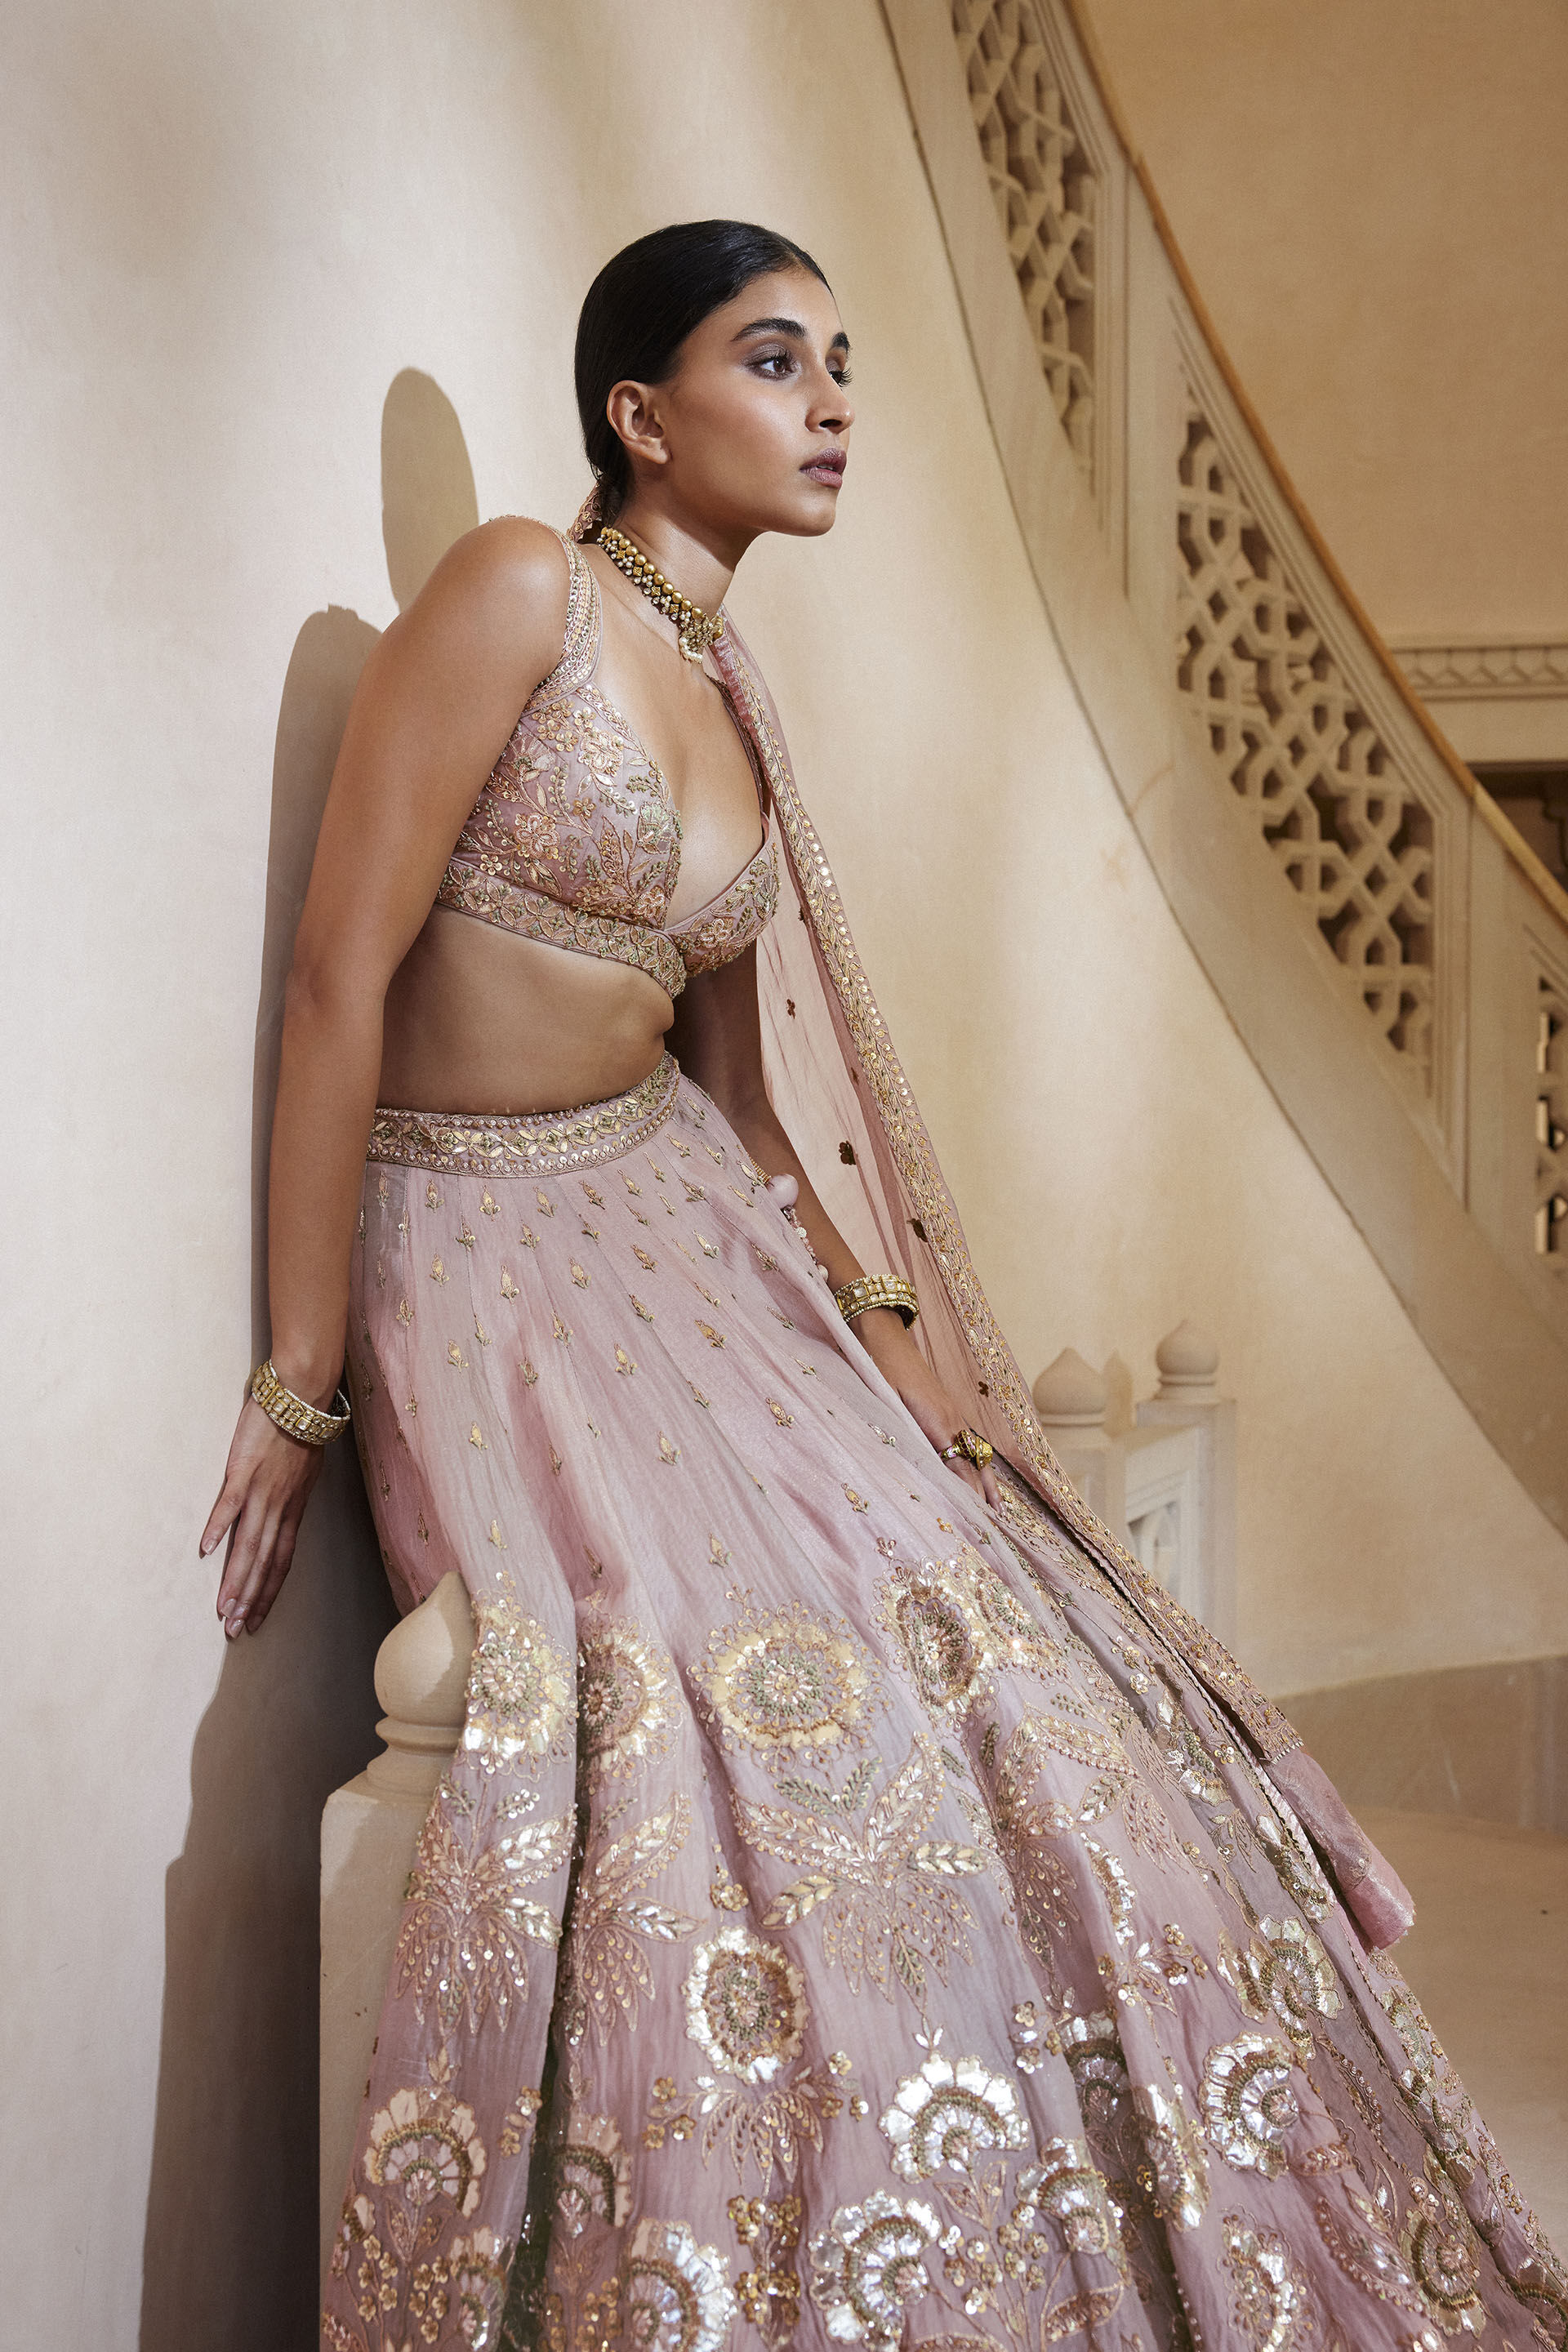 Anita Dongre's Latest Bridal Collection Blends Indian Crafts With  Contemporary Silhouettes - Forbes India